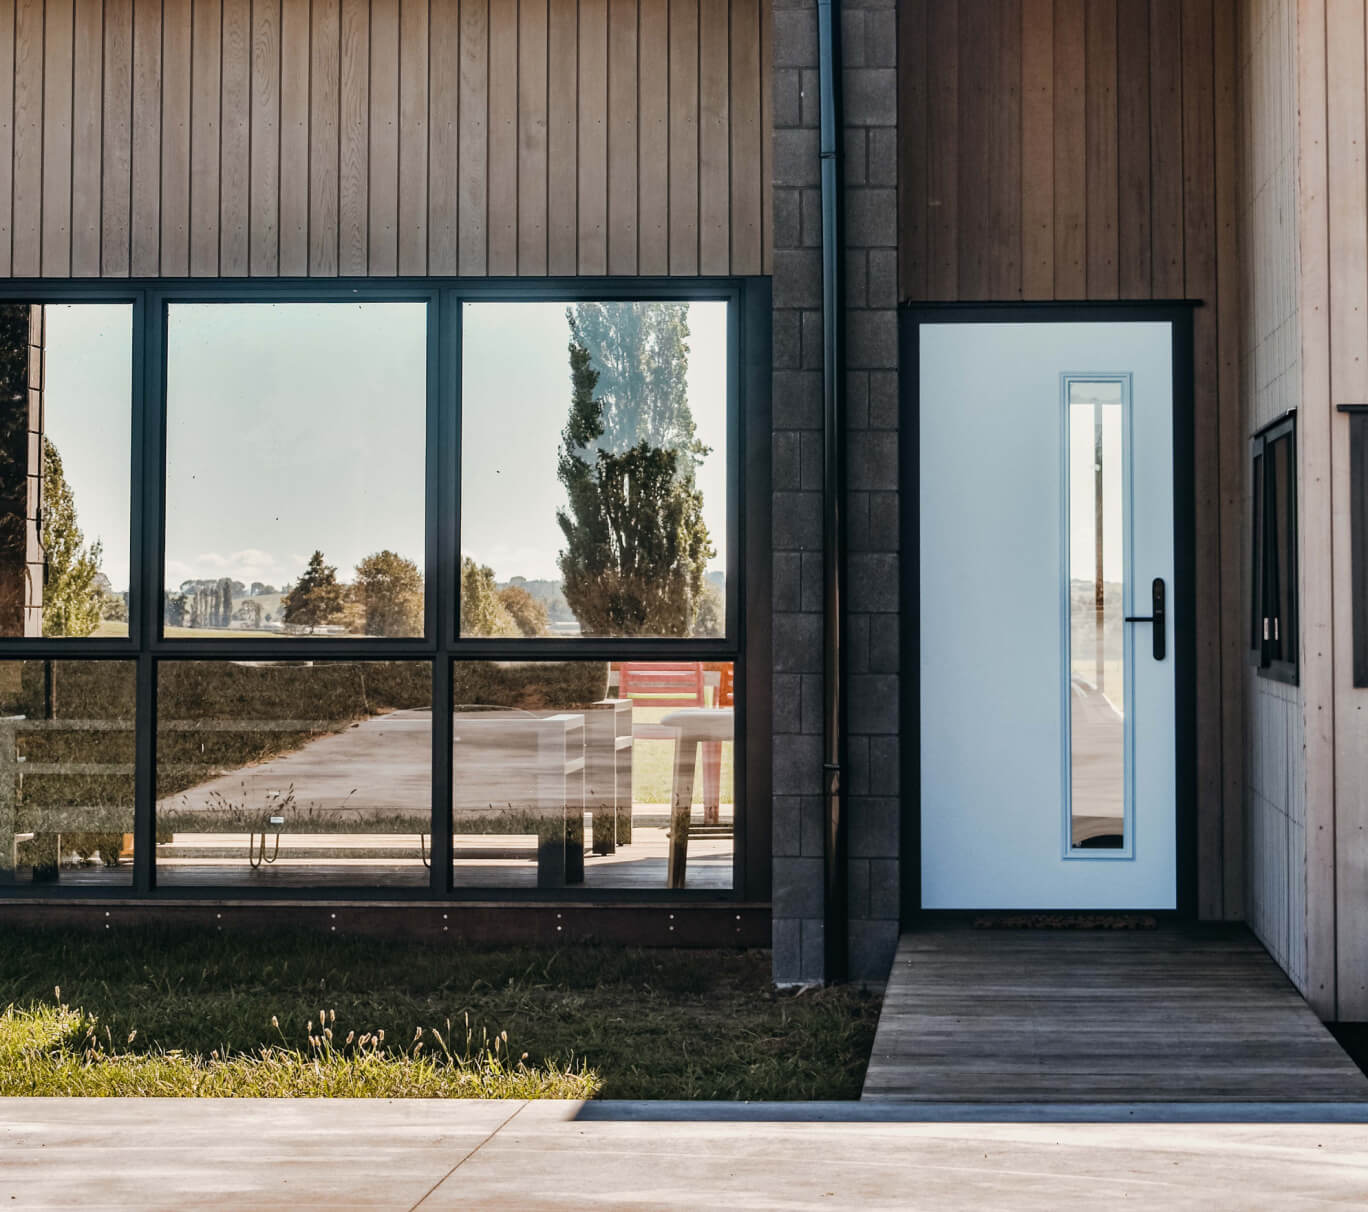 Duco single white hinged front door with a glass panel alongside black paneled windows set into the house